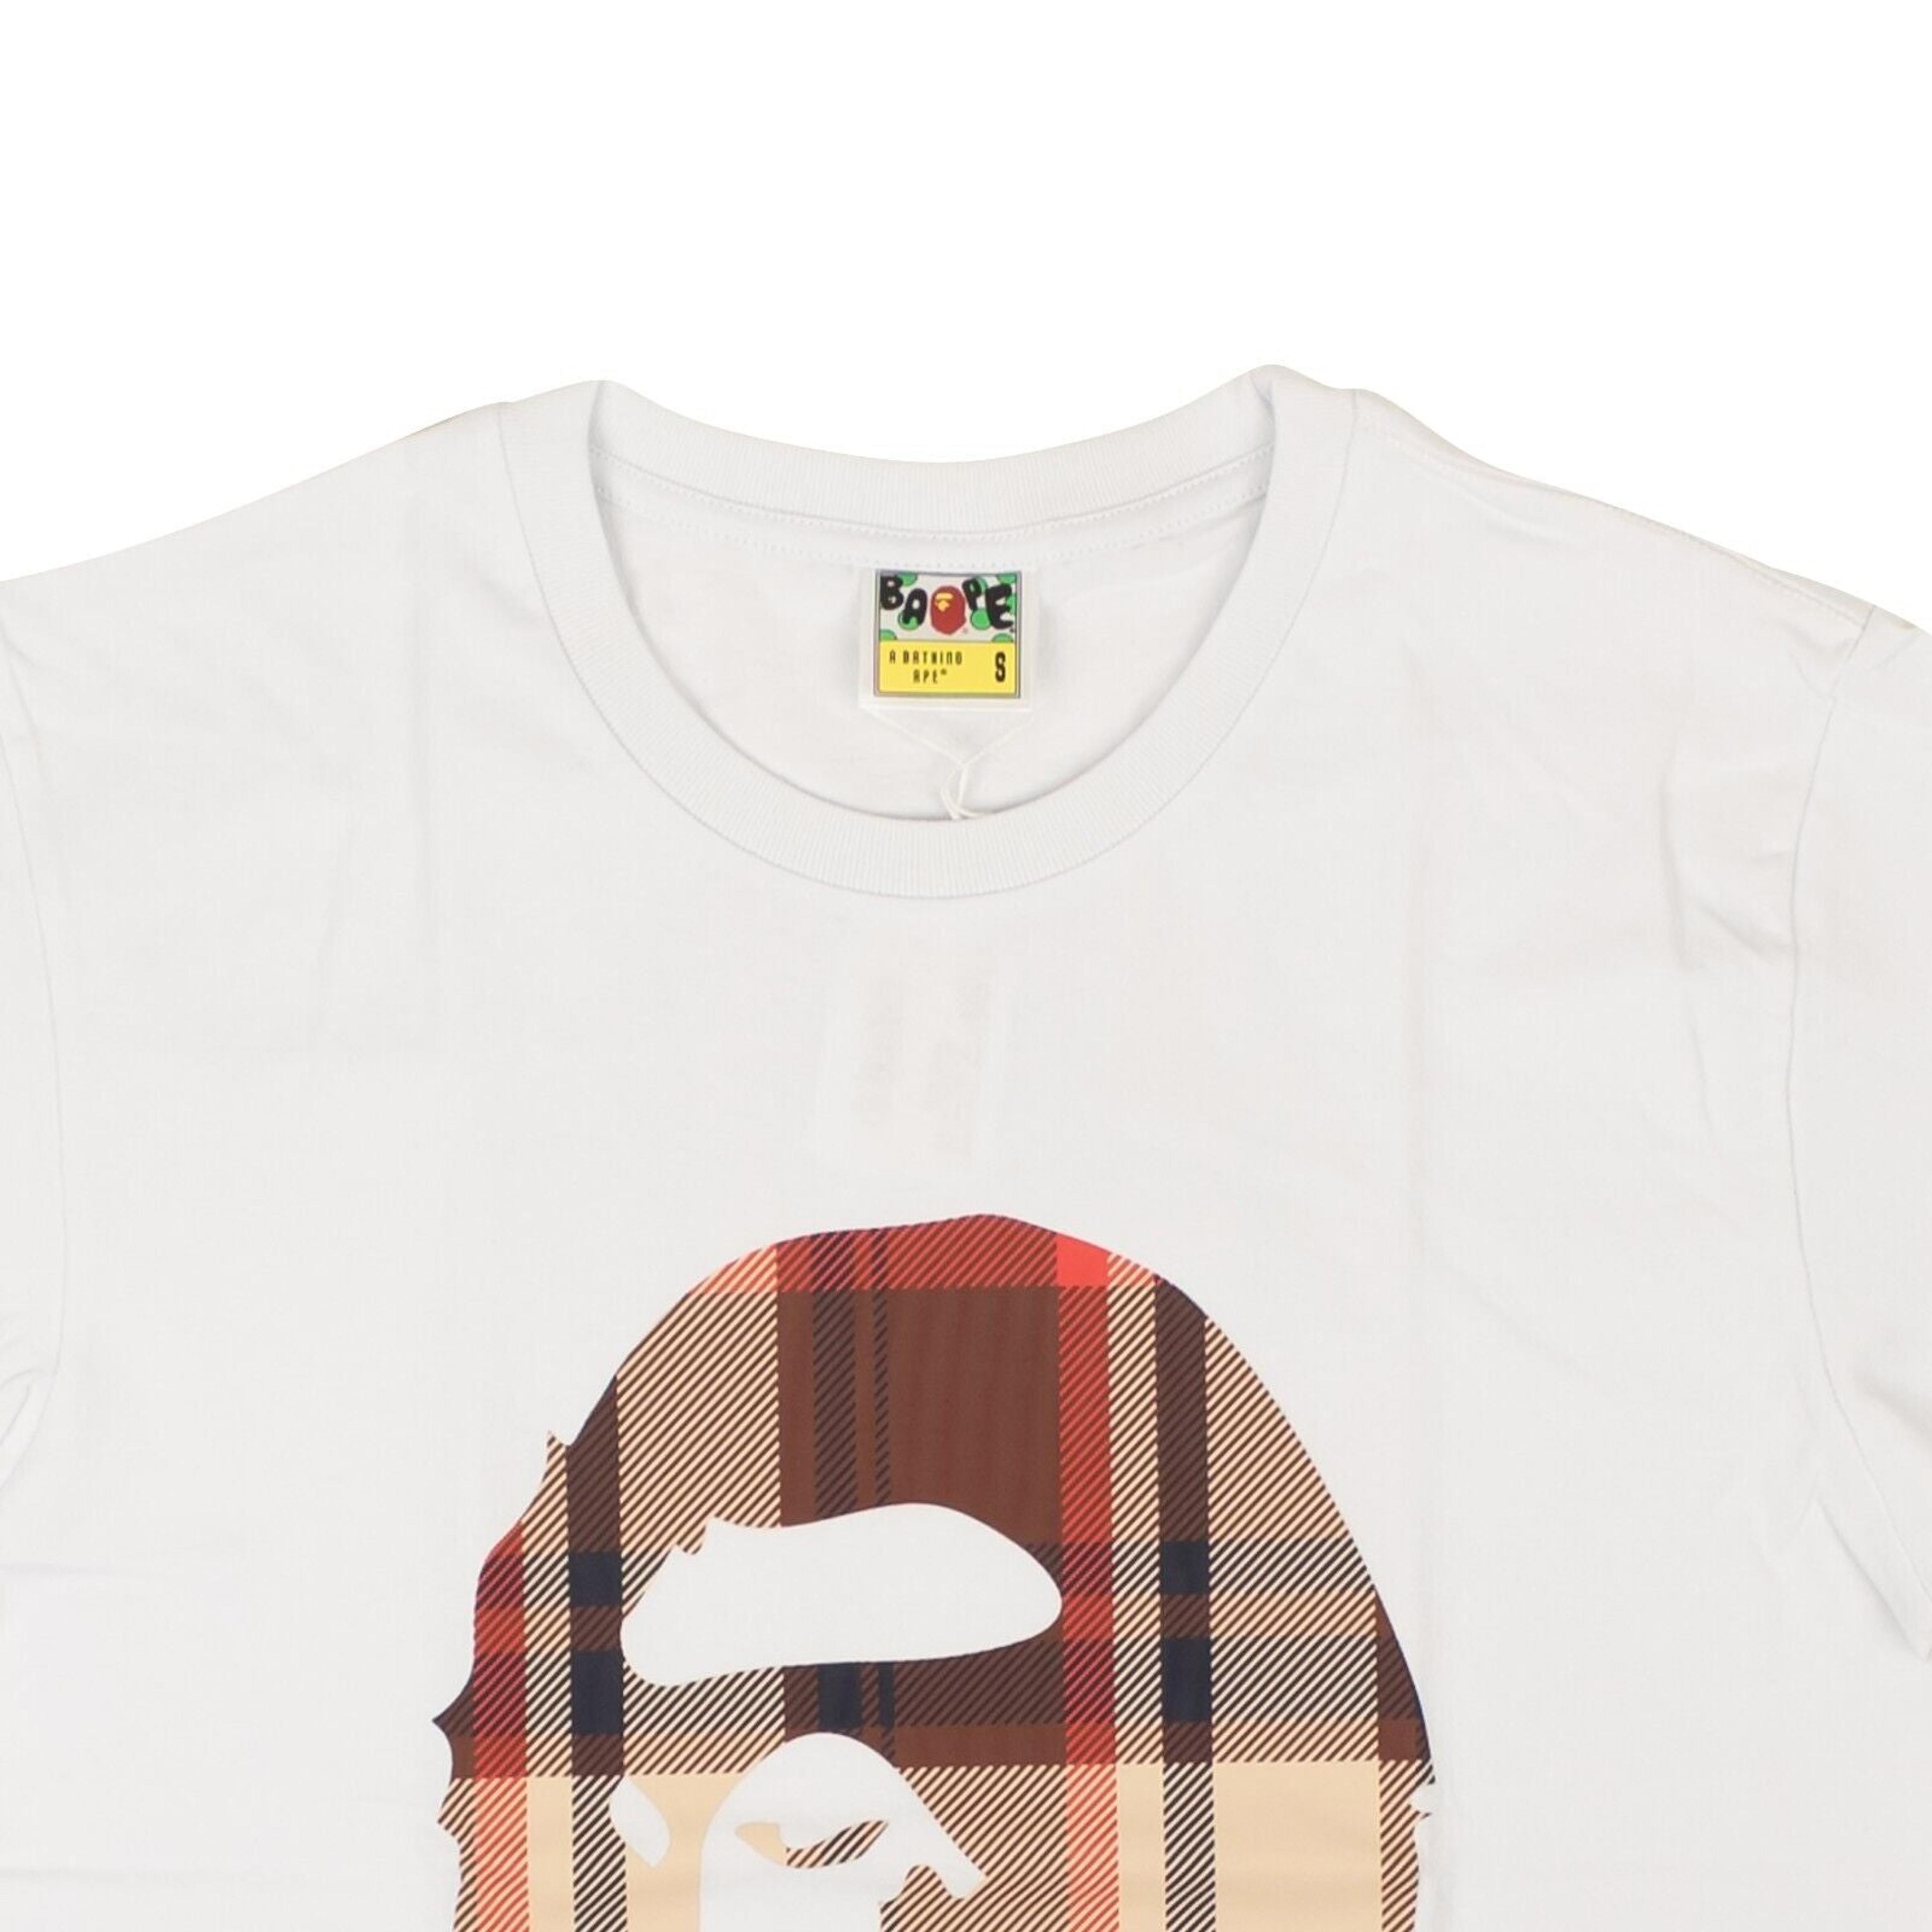 Alternate View 2 of White And Brown Plaid Ape Front Logo Short Sleeve T-Shirt